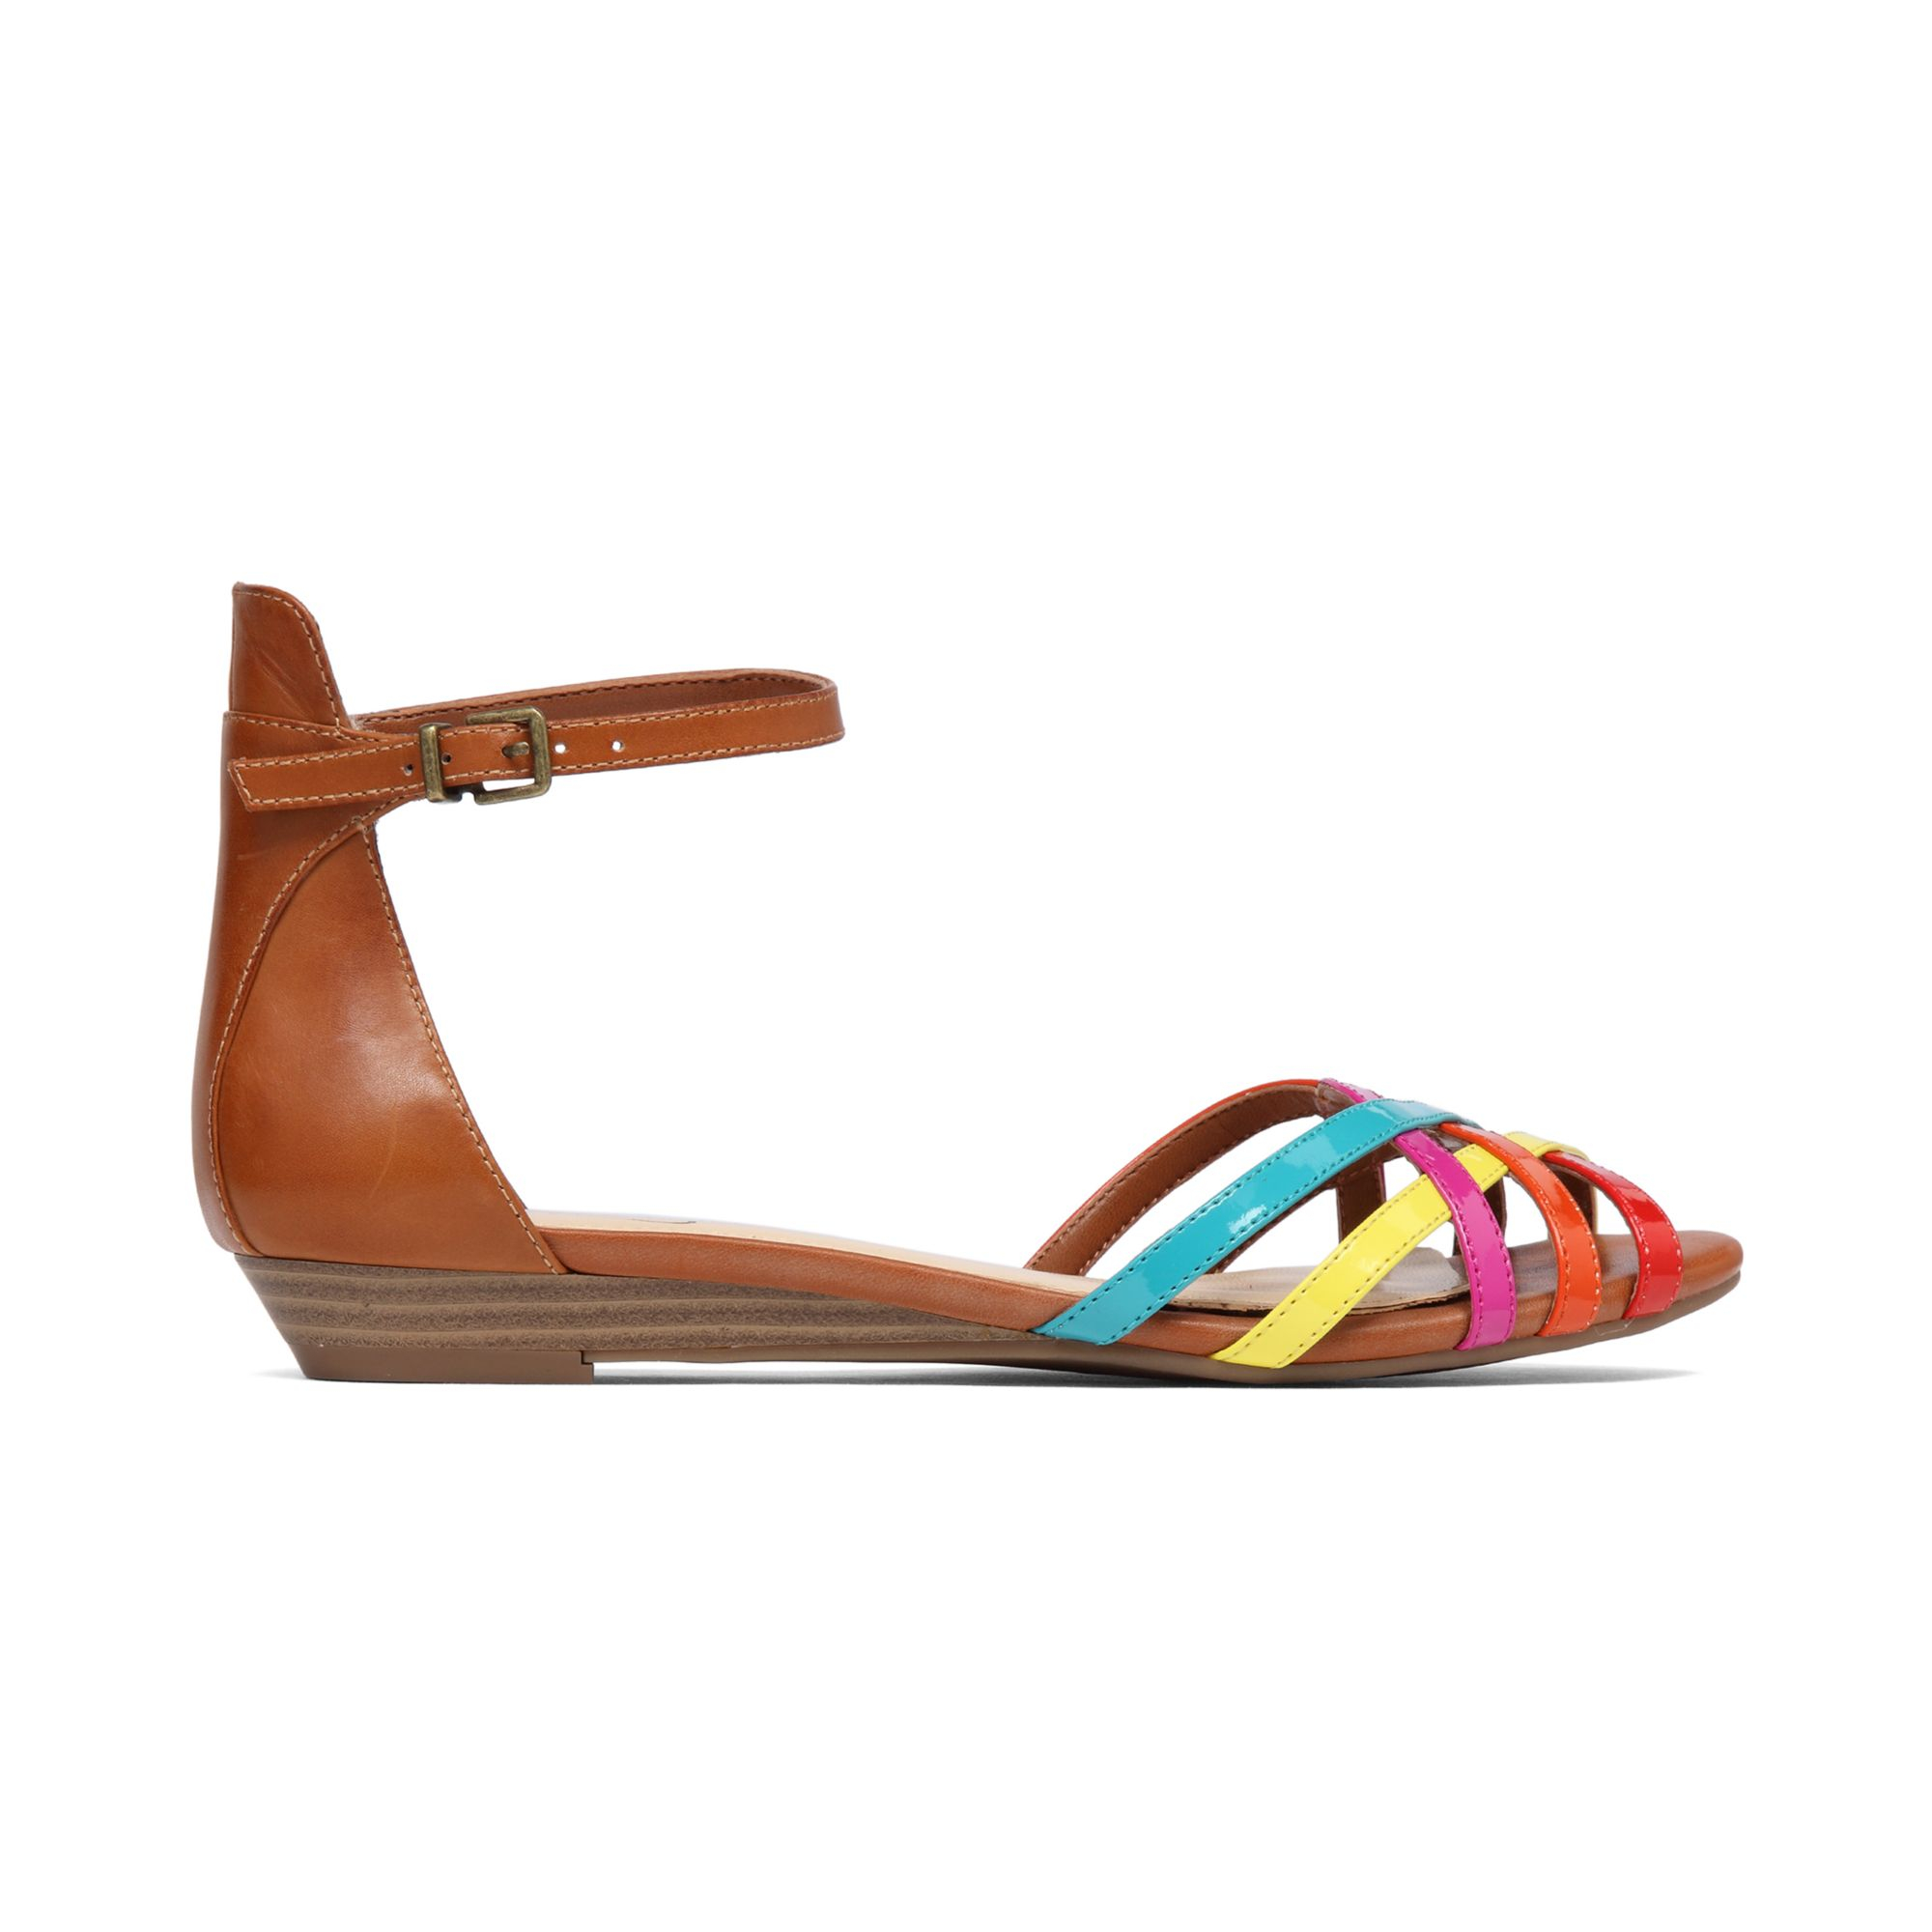 Lyst - Jessica Simpson Essty Strappy Ankle Strap Sandals in Brown